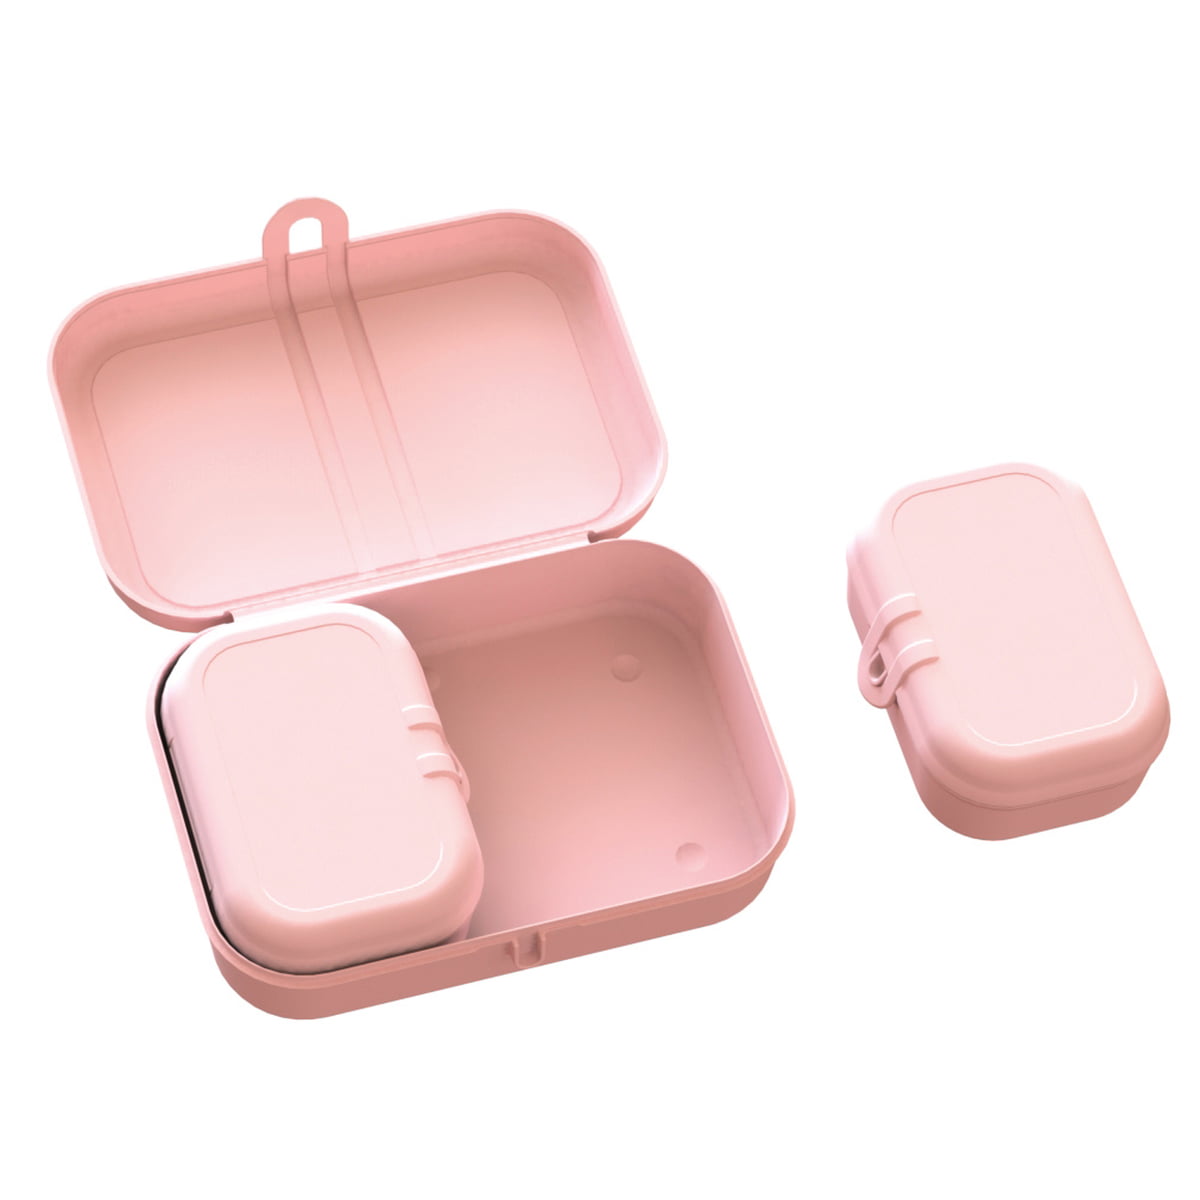 pink lunch box